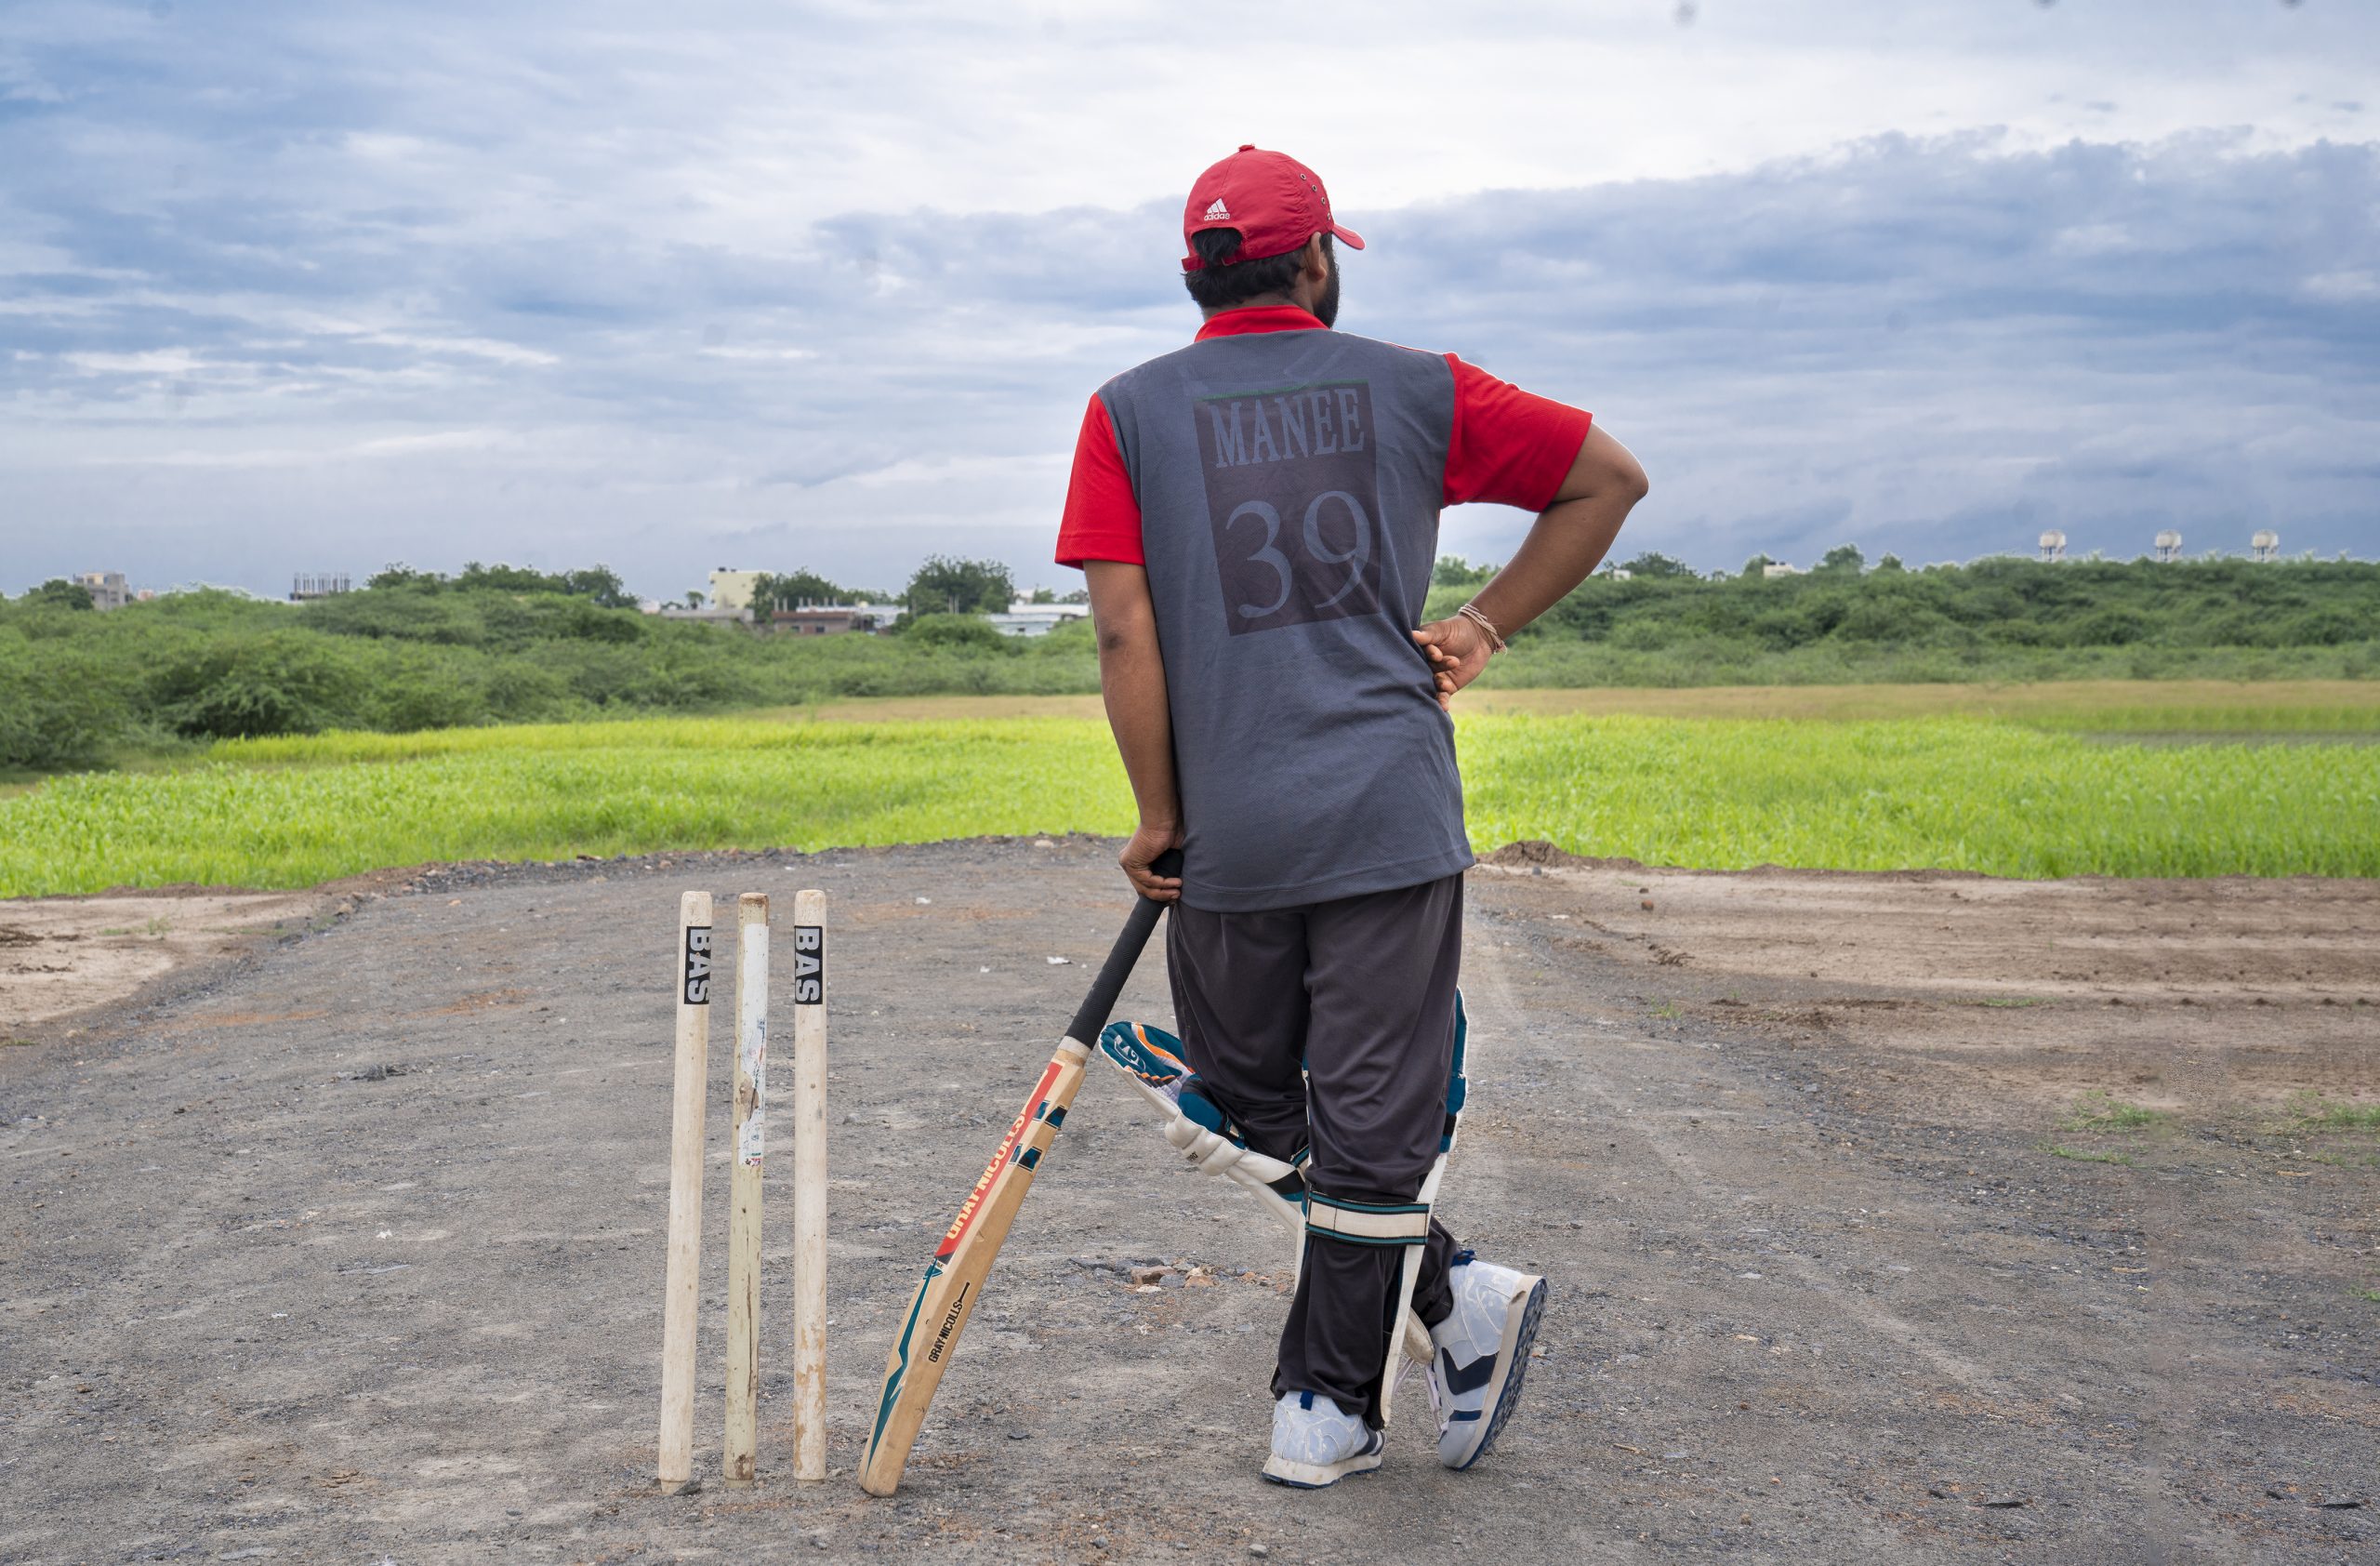 Man playing cricket in a rural area